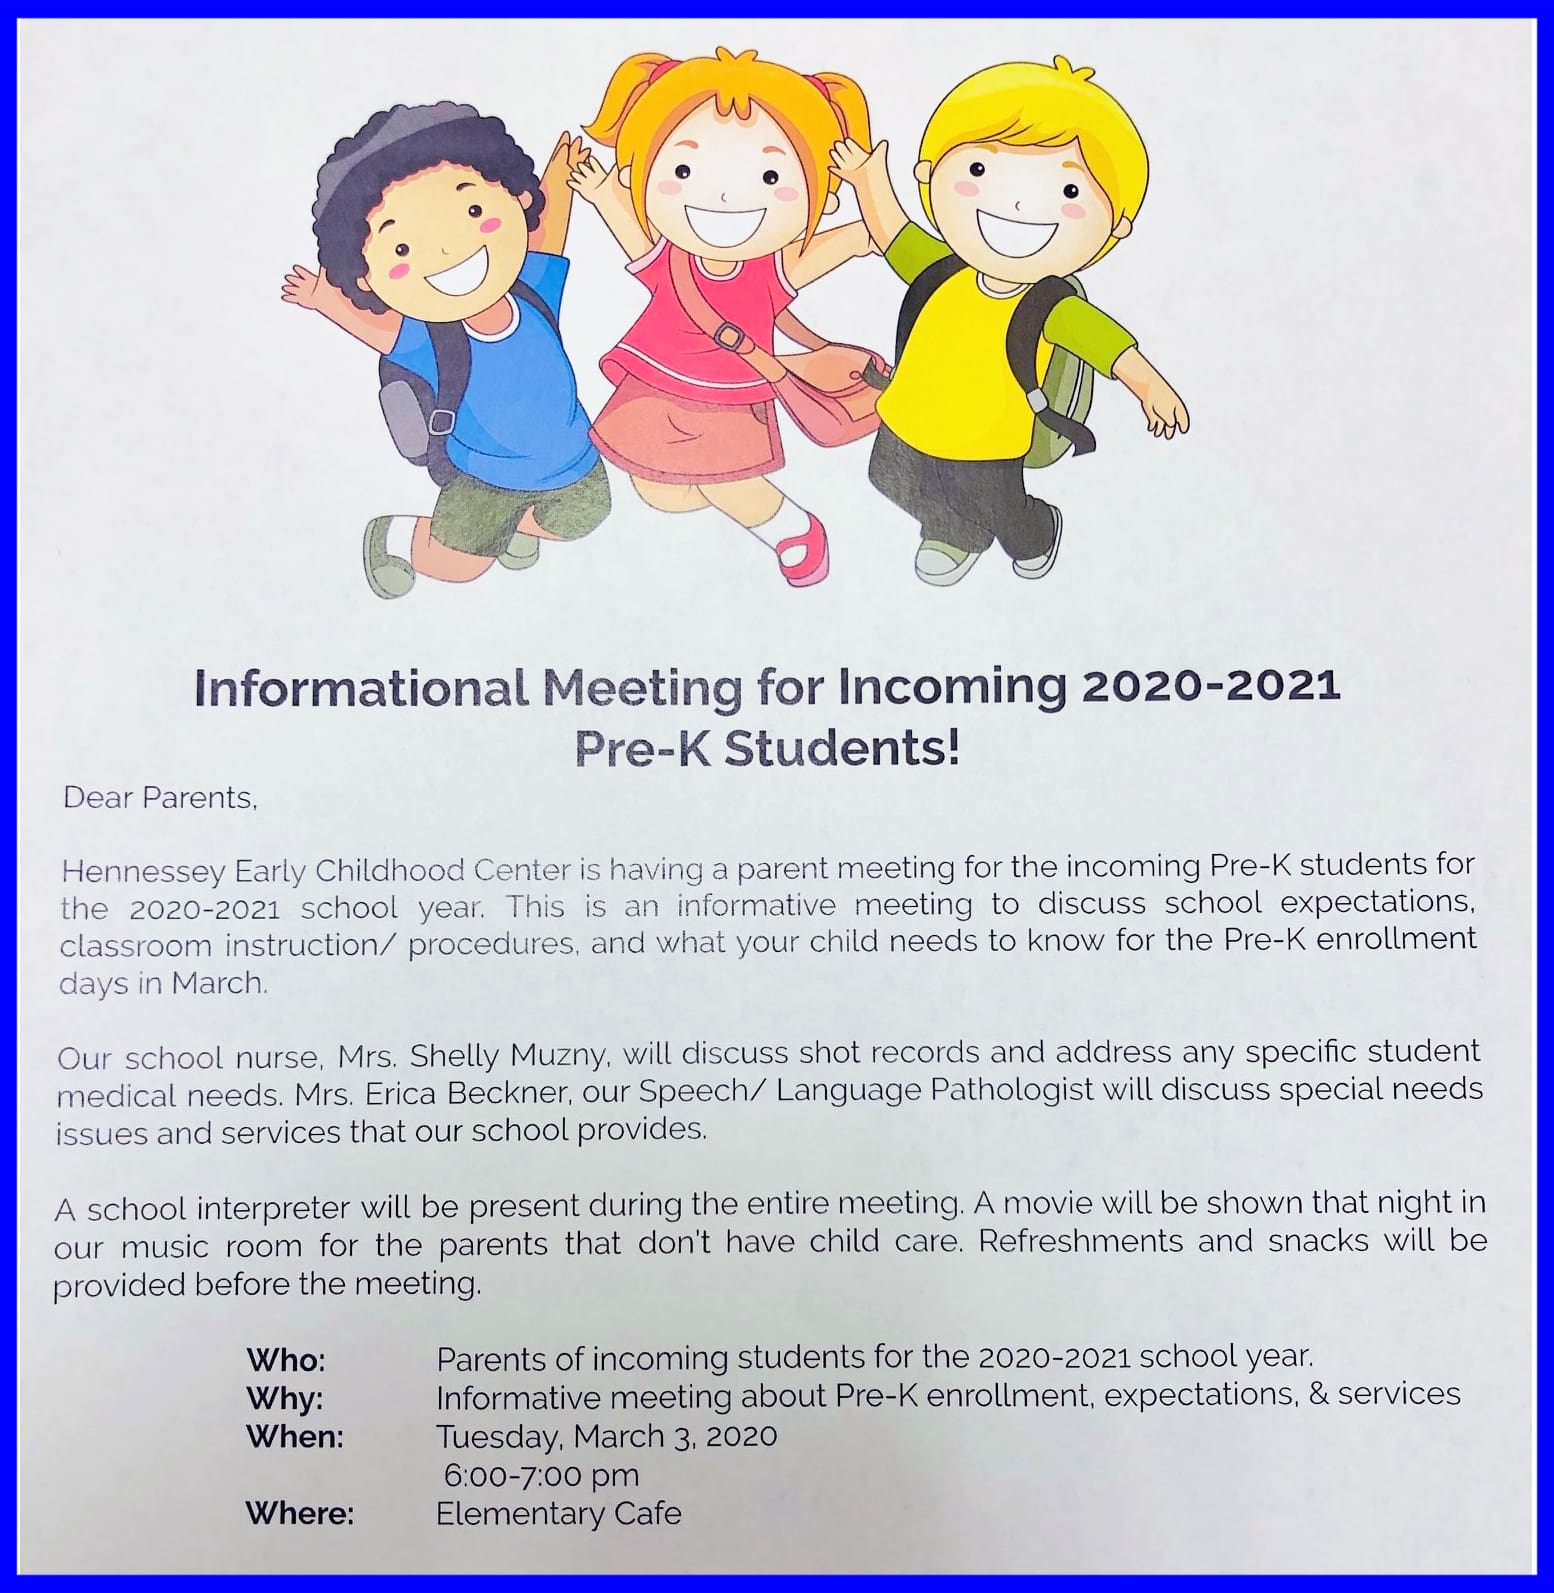 Informational Meeting for Incoming 2020-2021 Pre-K Students! Tuesday, March 3